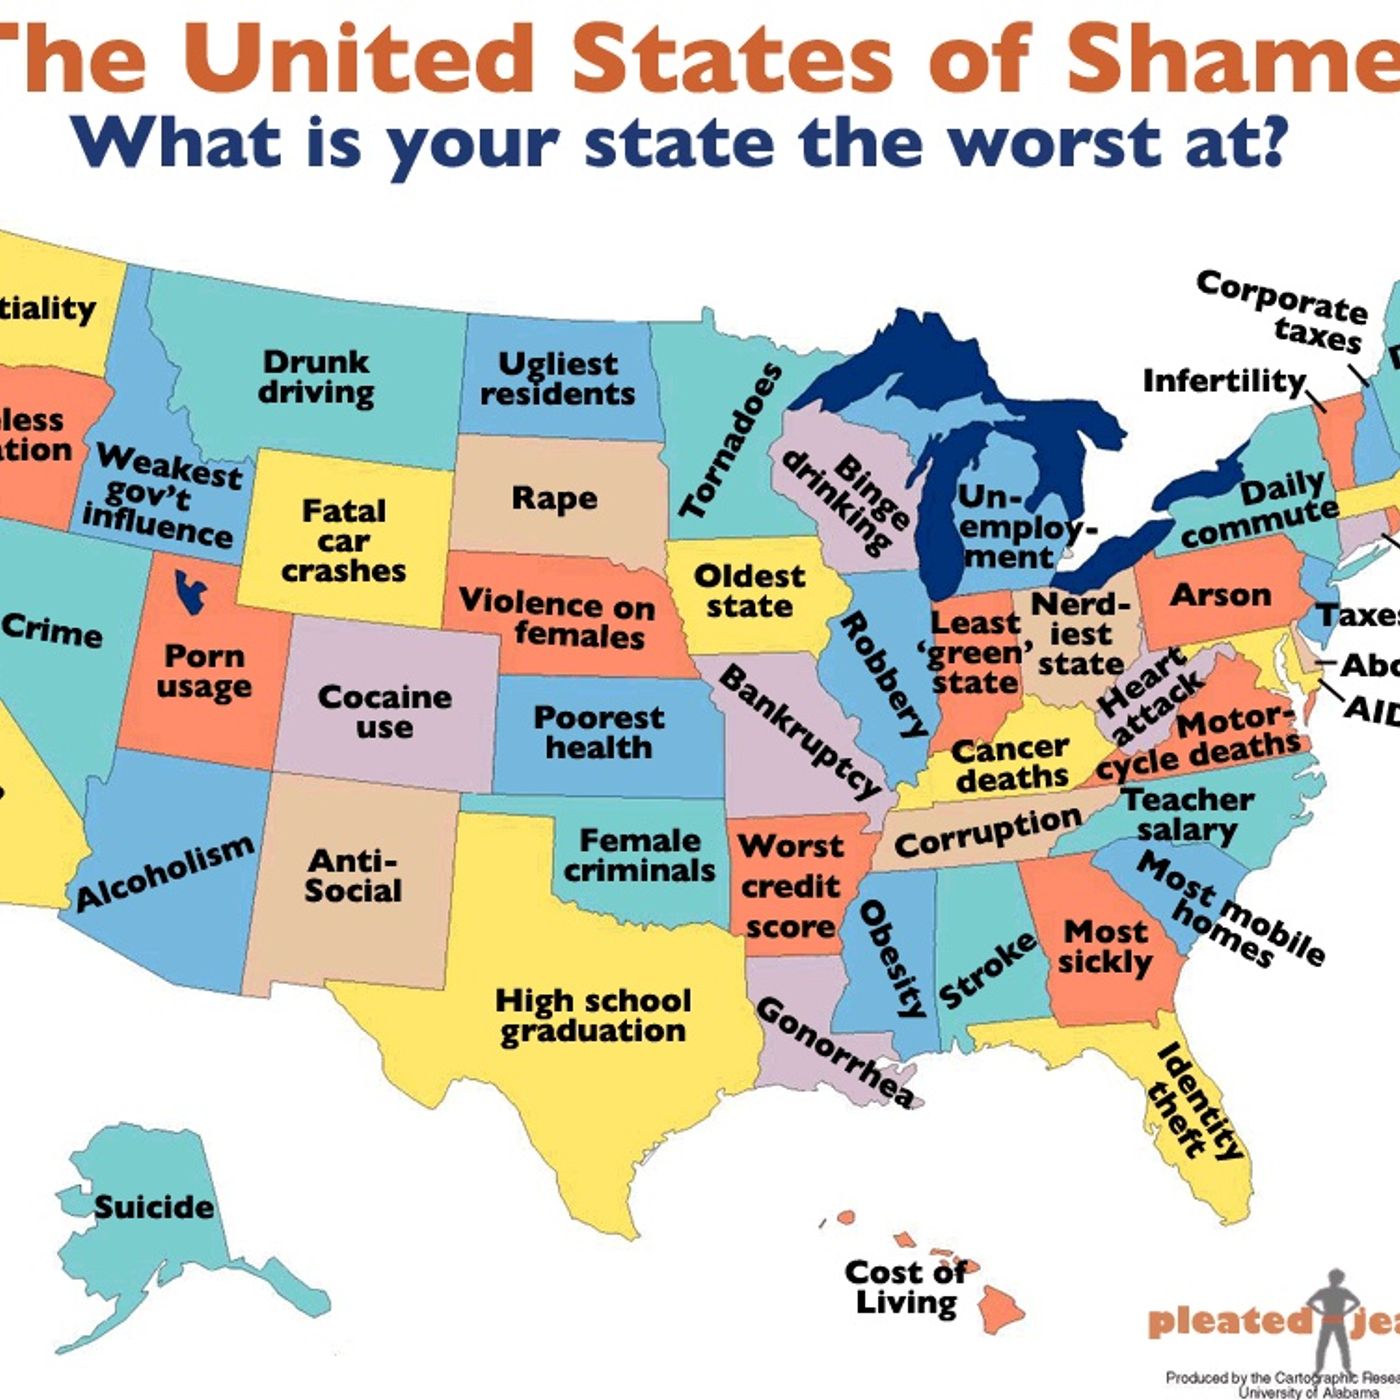 What Is Your State Bad At?